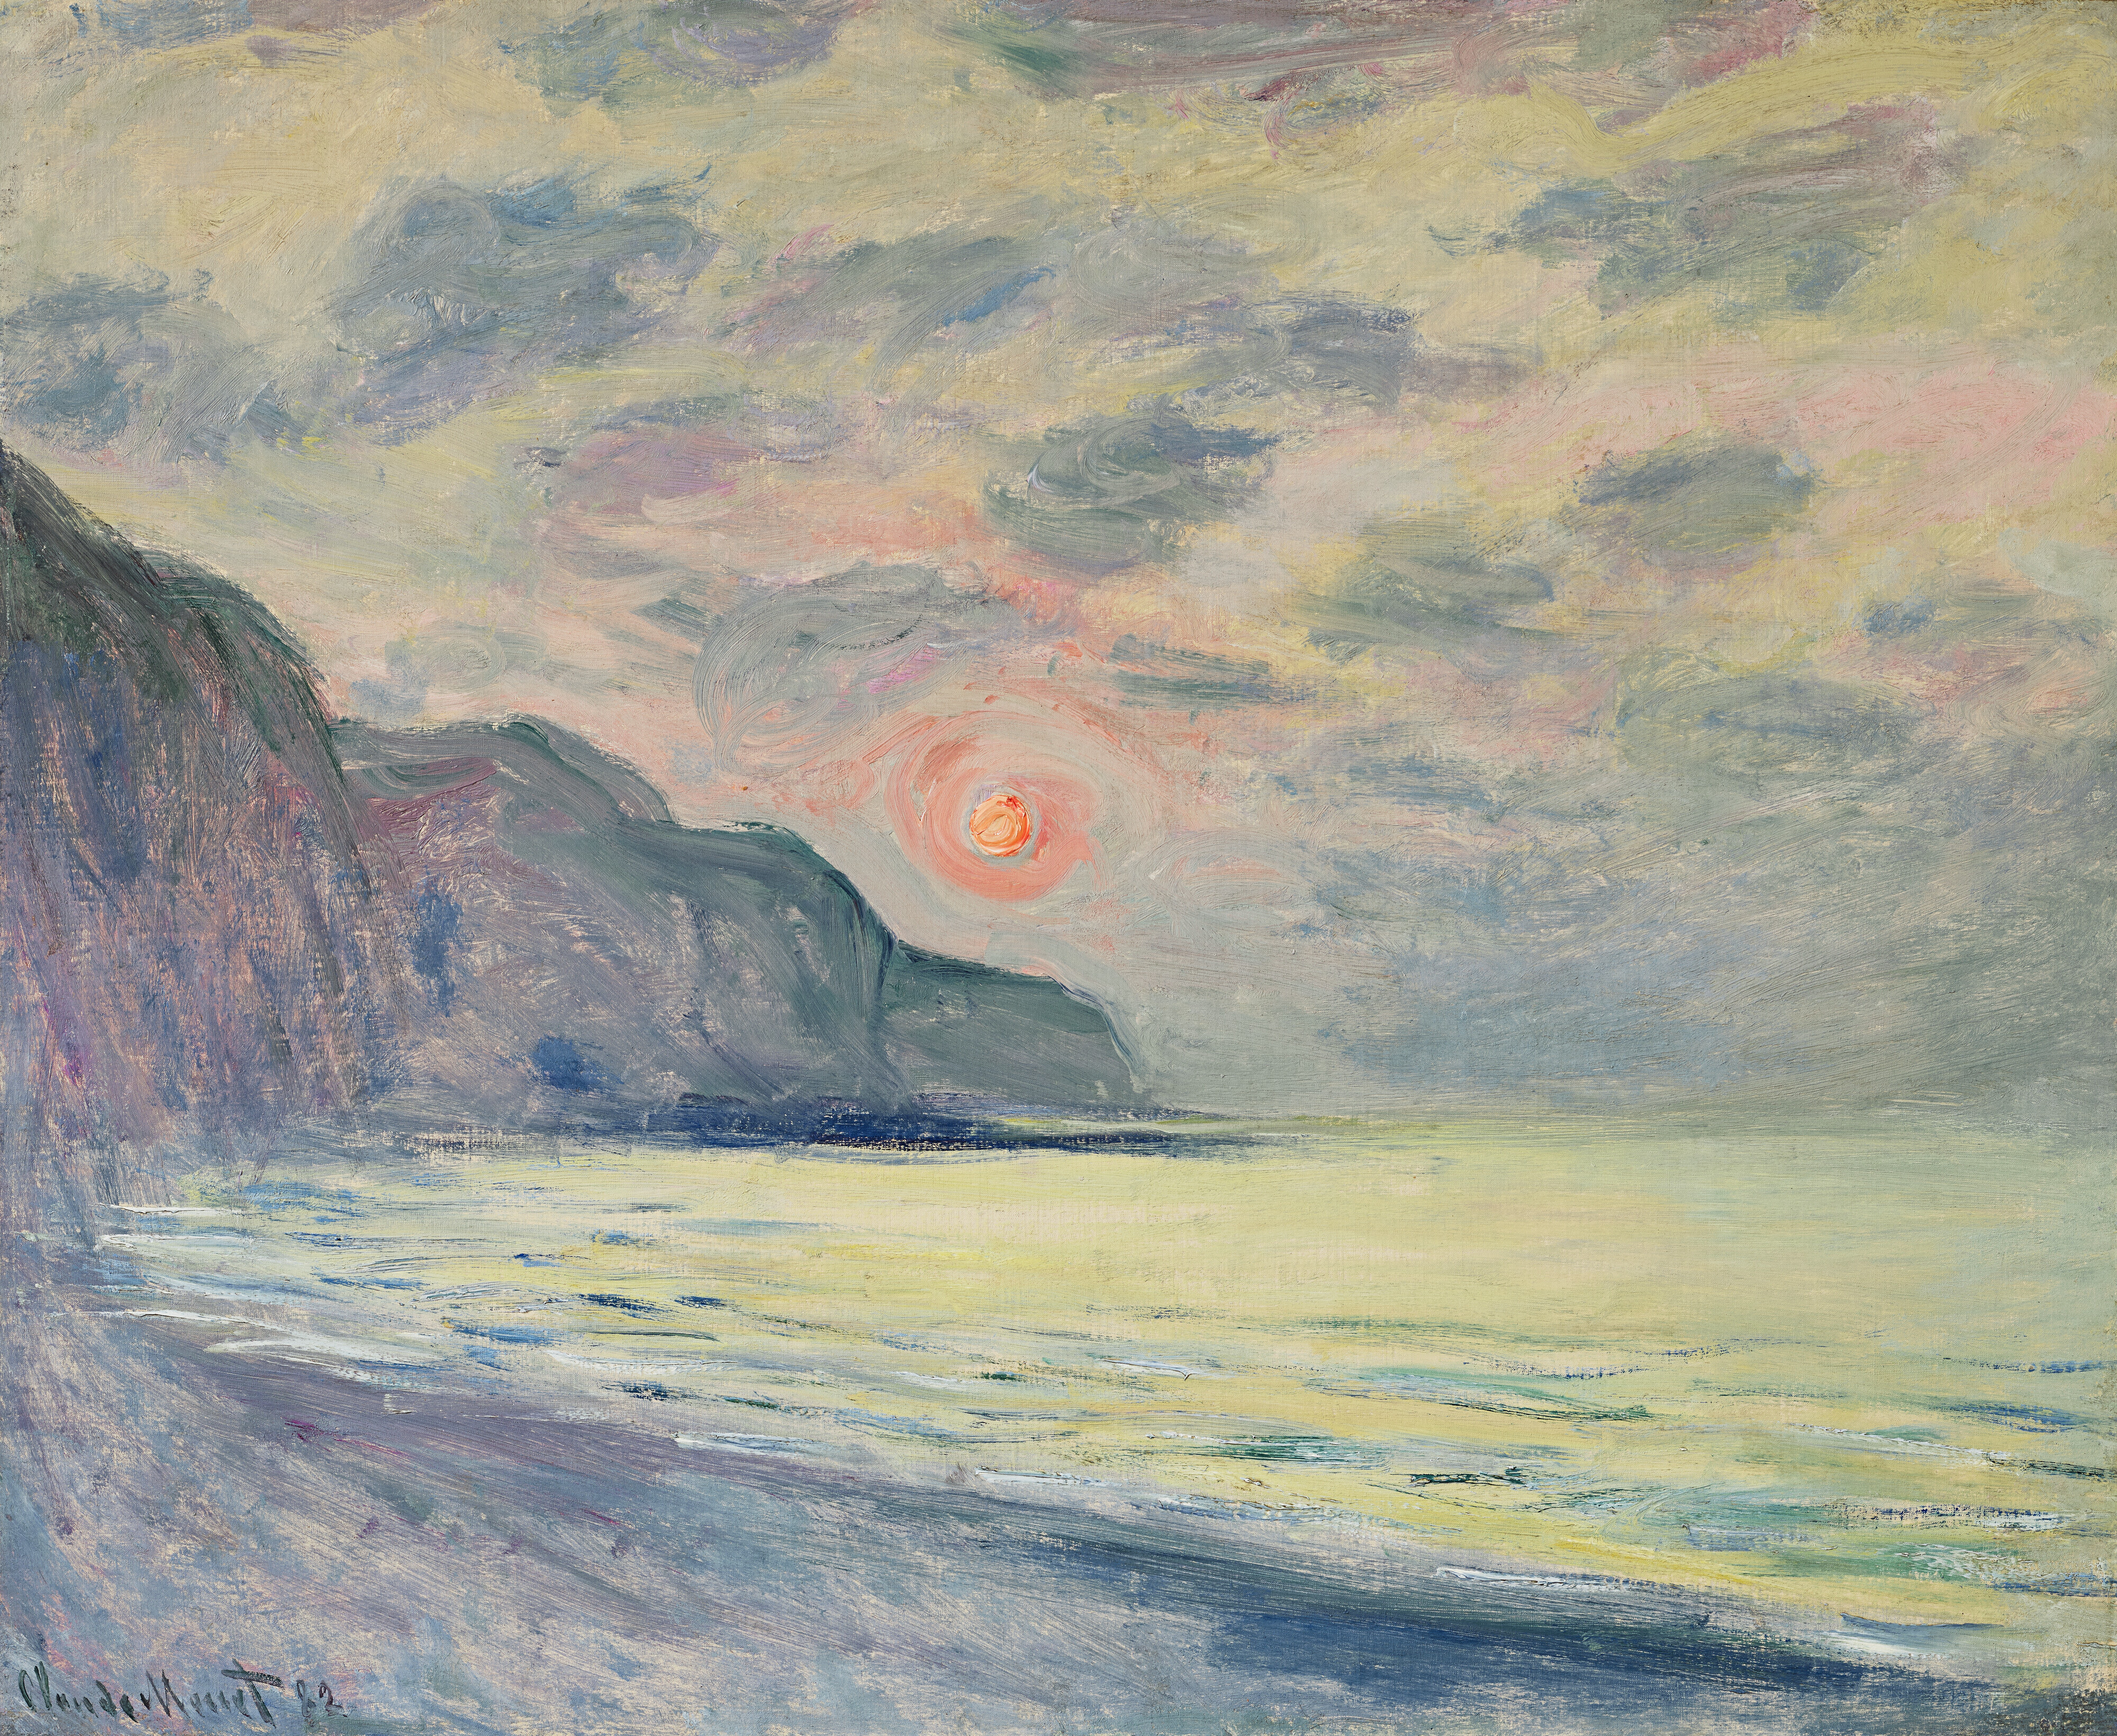 The Collection of Salvador and Christina Lang Assaël CLAUDE MONET (1840-1926) Soleil couchant, temps brumeux, Pourville oil on canvas 24¼ x 29¼ in. (61.5 x 74.3 cm.) Painted in 1882 $2,500,000-3,500,000